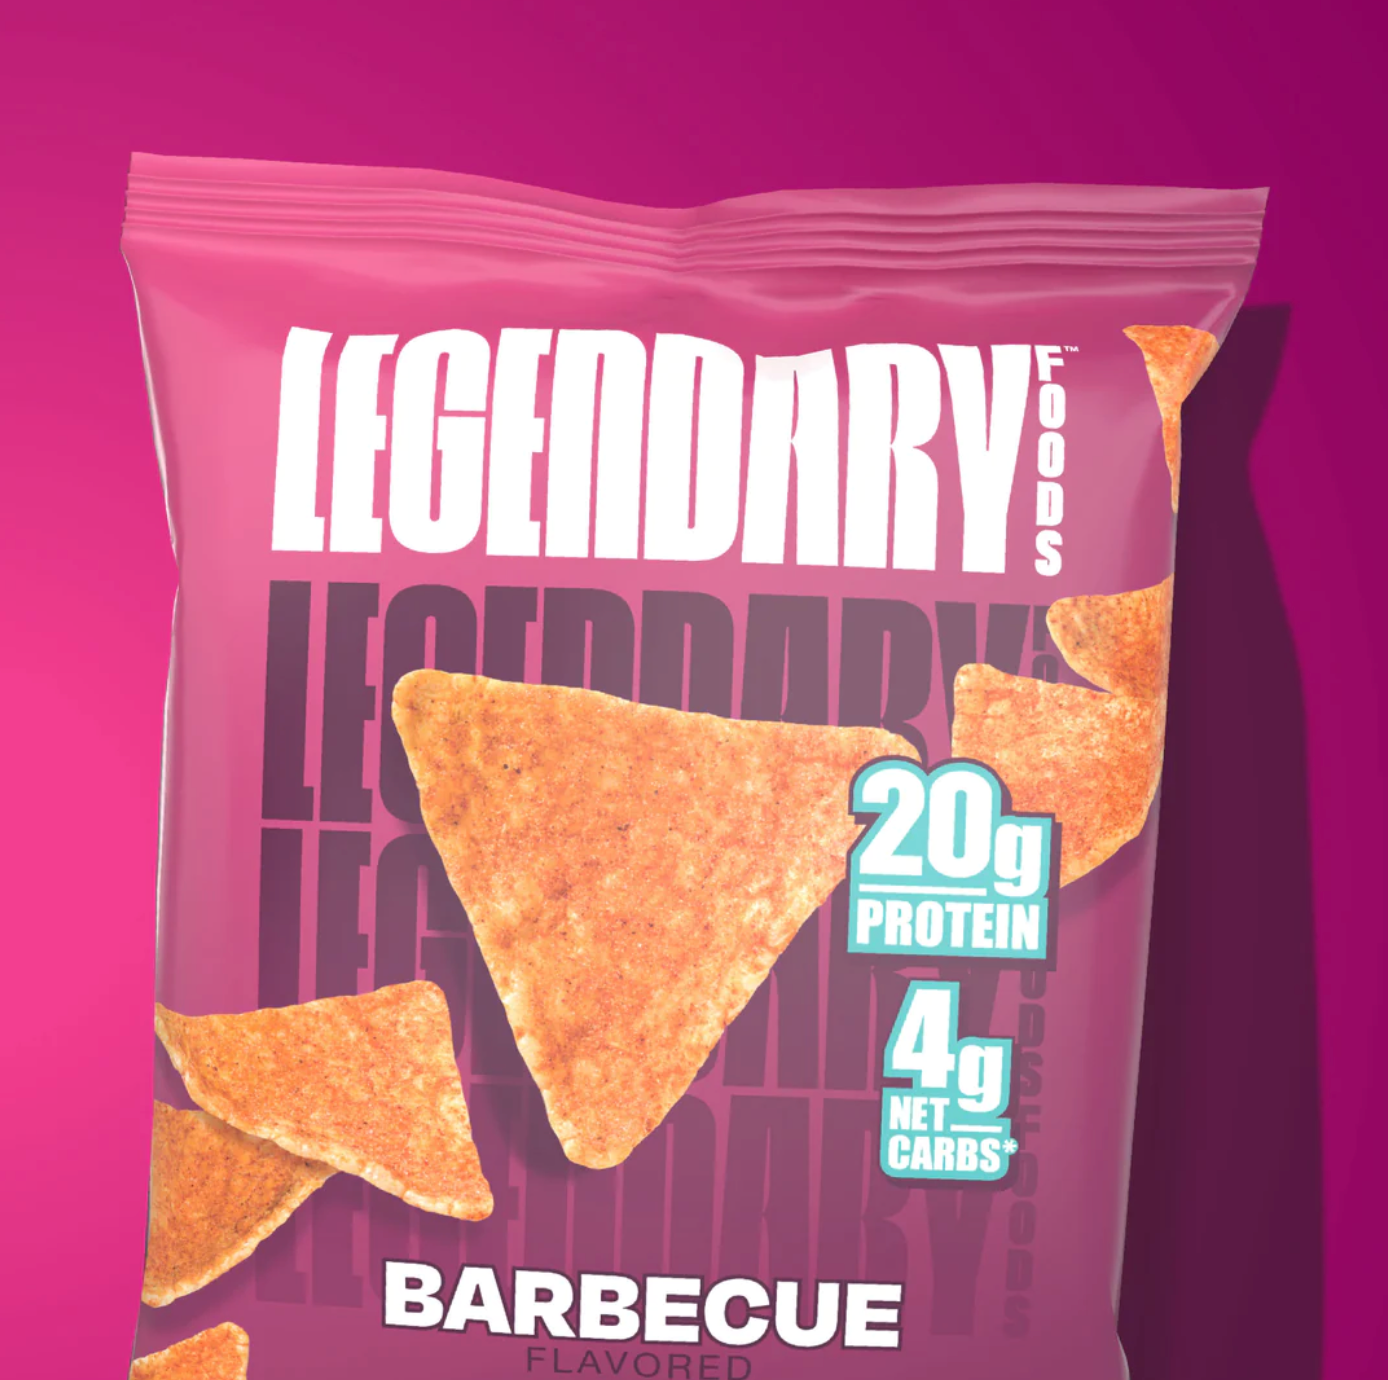 Legendary Popped Protein Chips